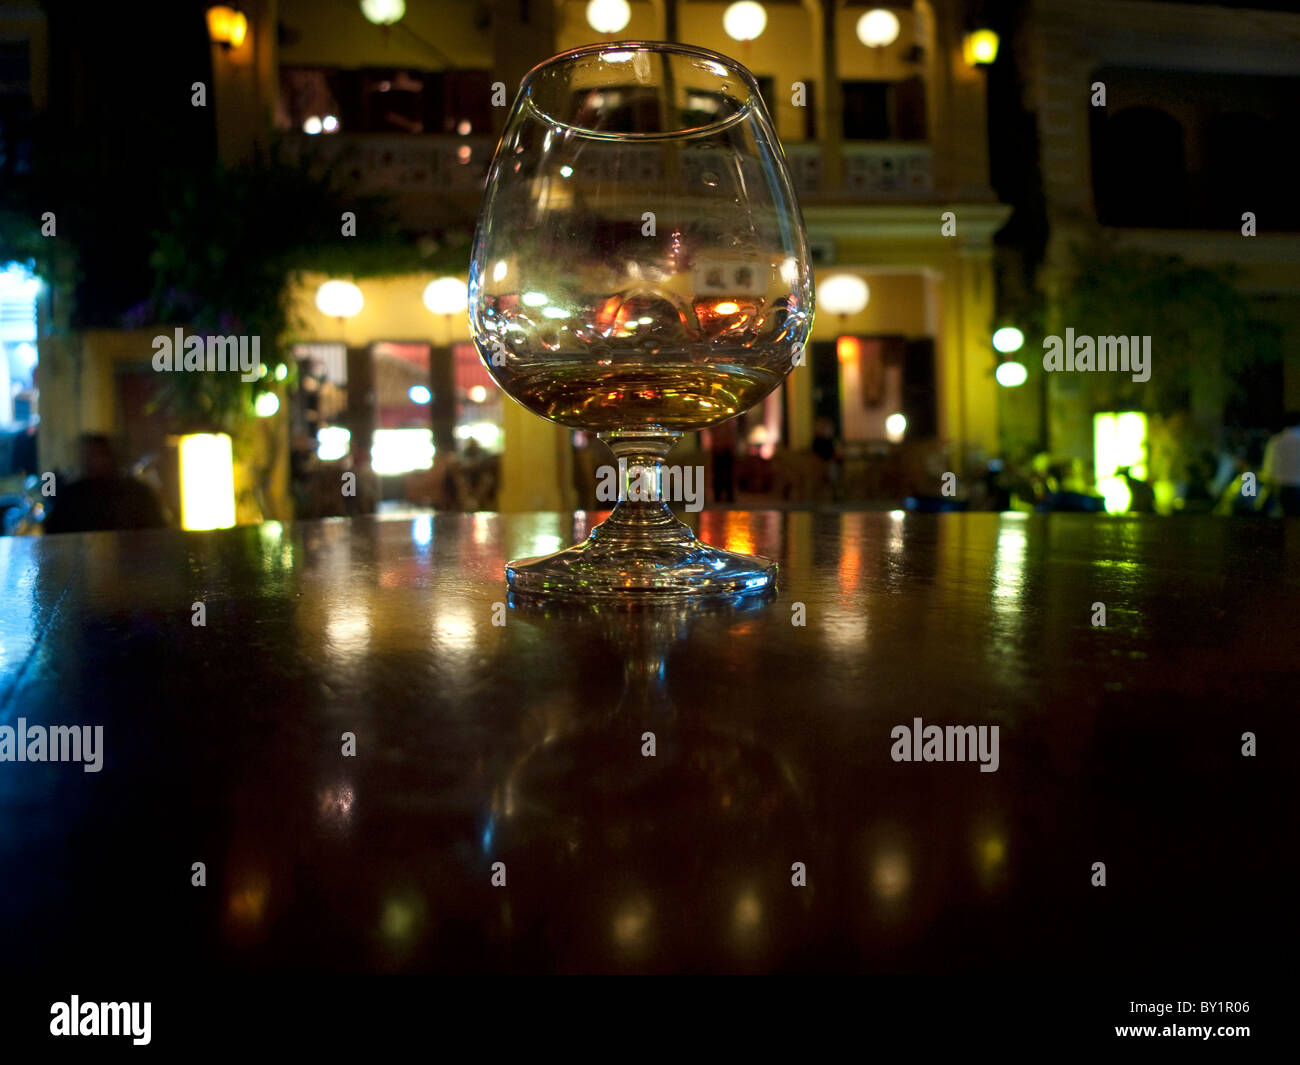 Glass on table at night, Hoi An, Vietnam Stock Photo